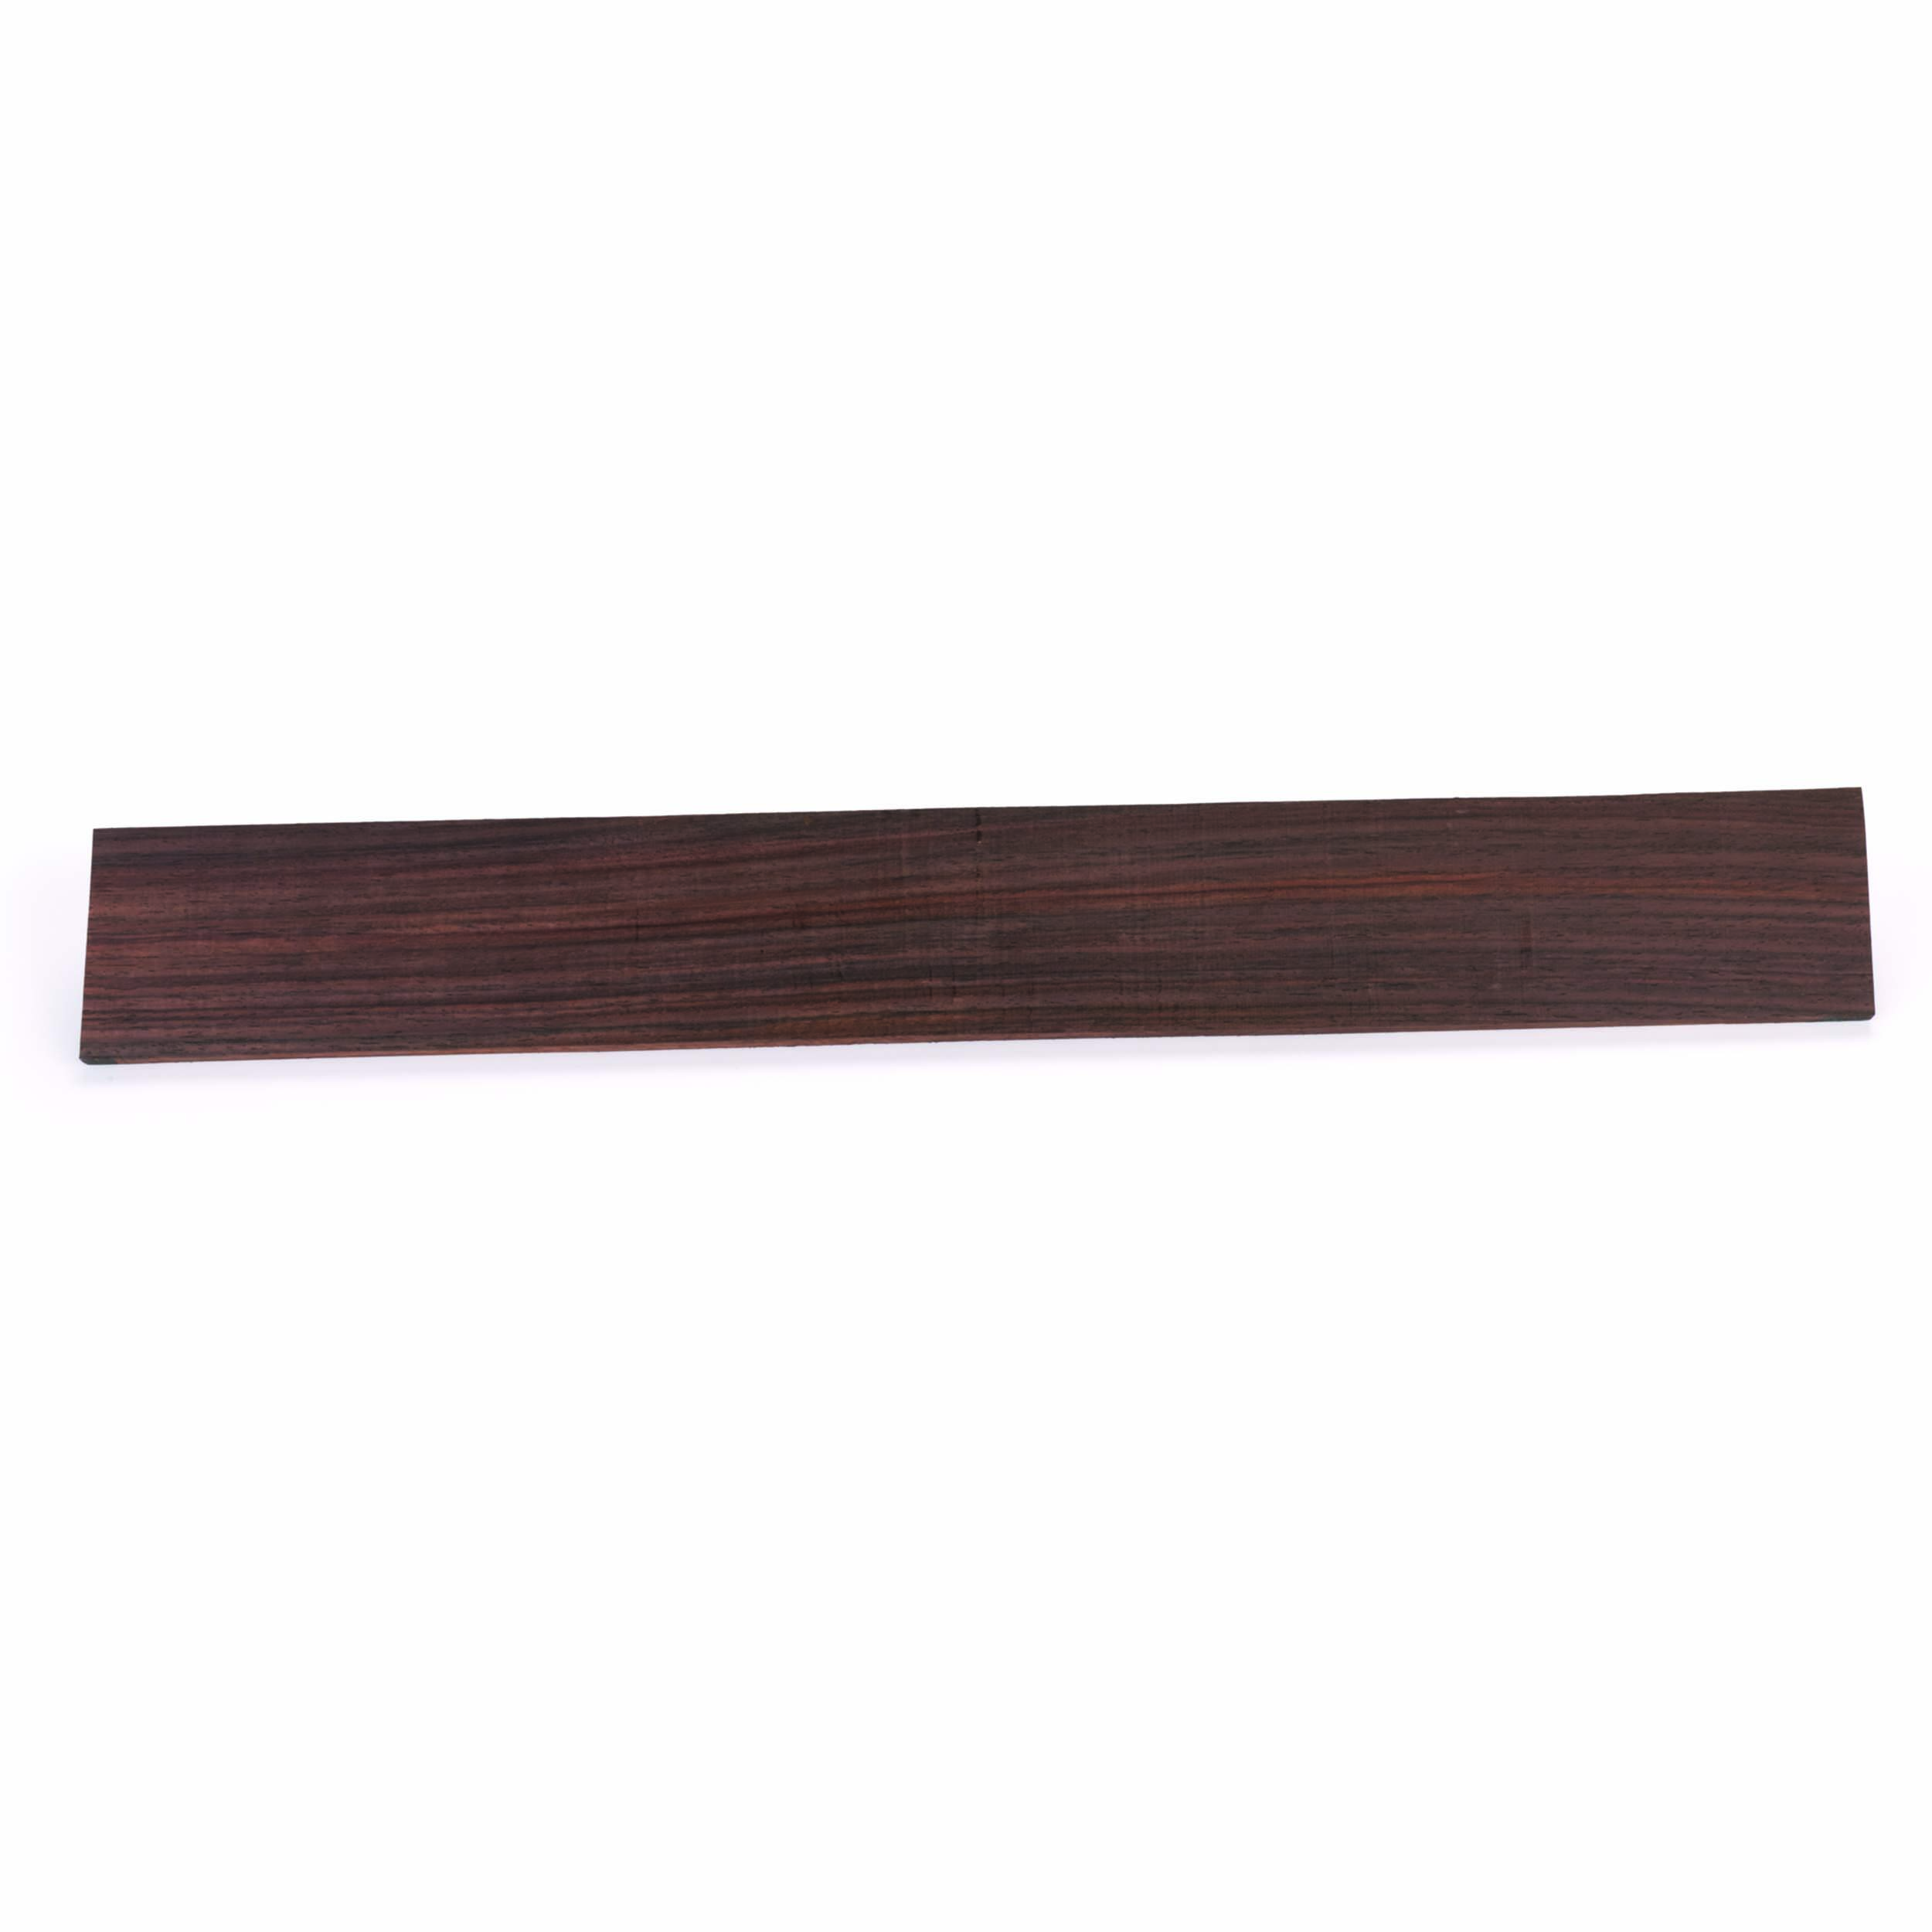 Rosewood, East Indian Guitar Finger Board 3/8" X 2-13/16" X 21"